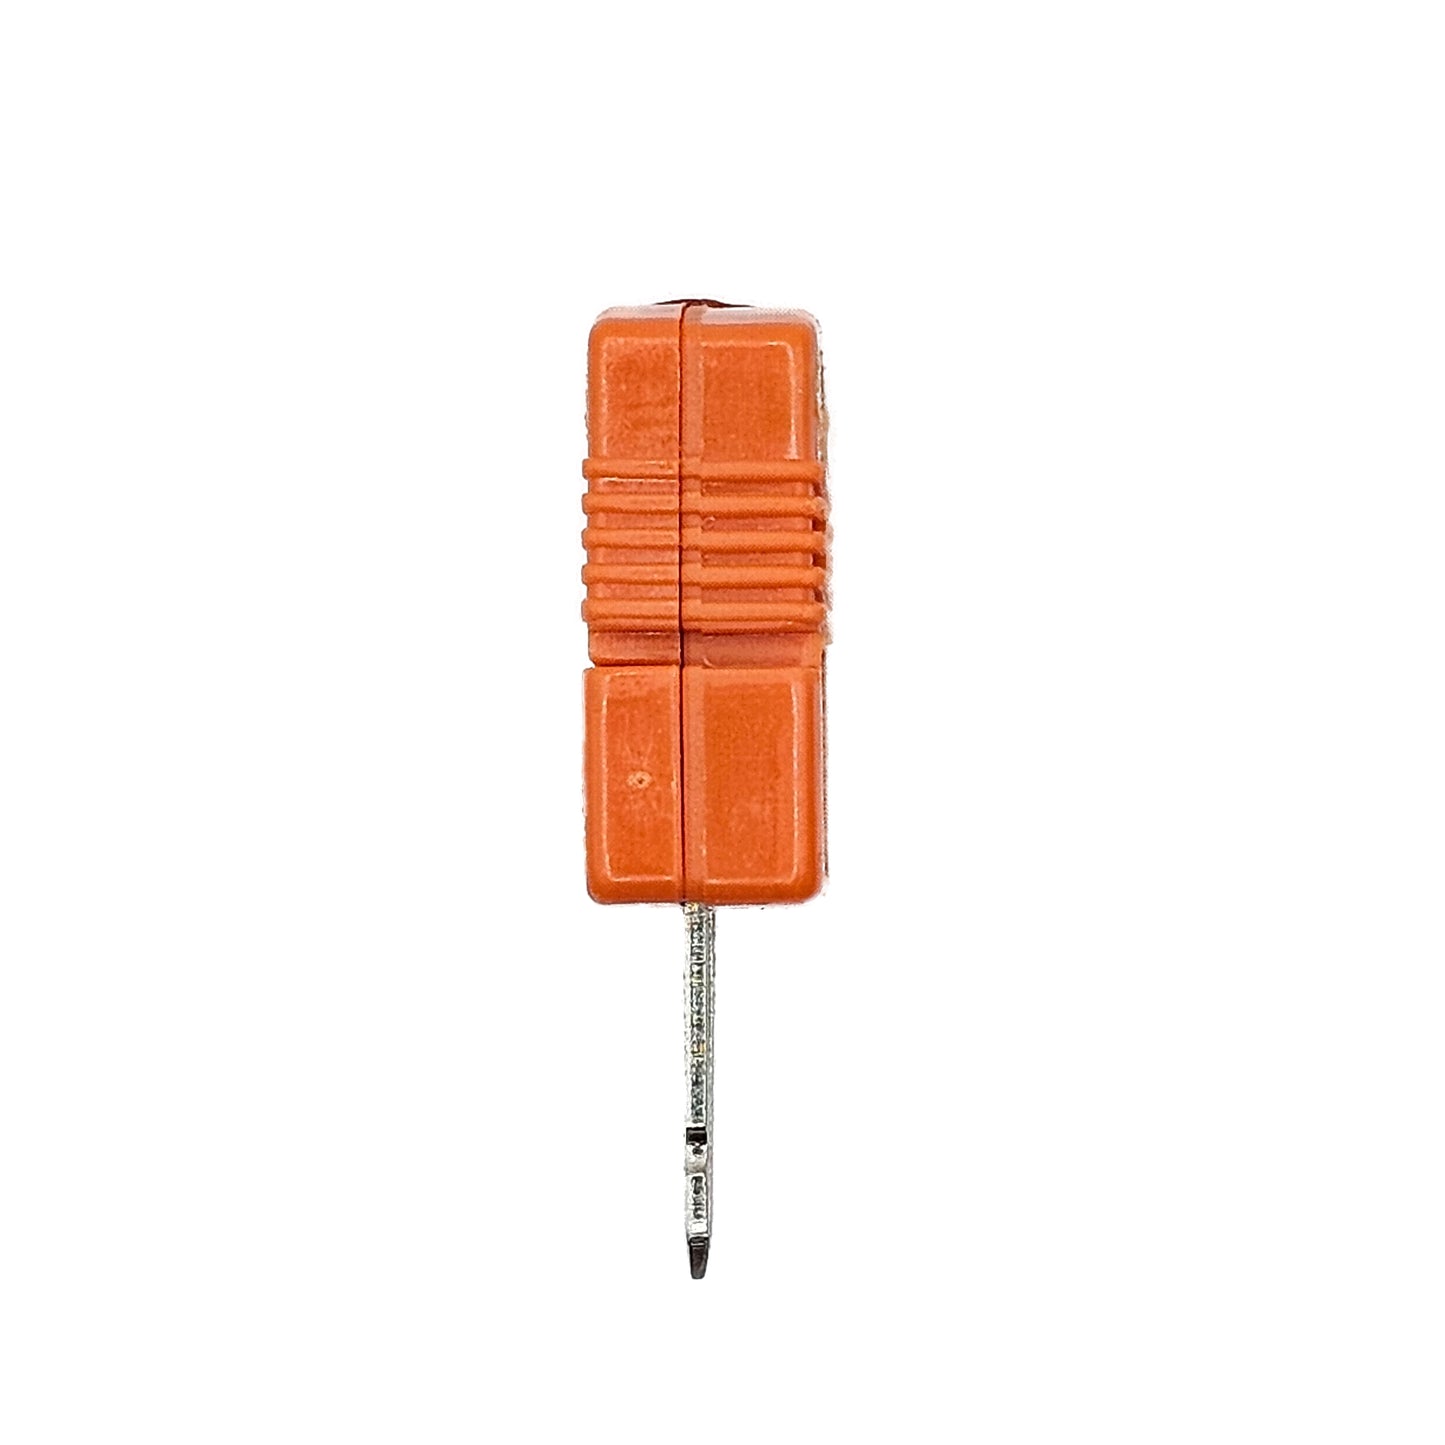 Type N Miniature Thermocouple Connector, Omega Style - Male